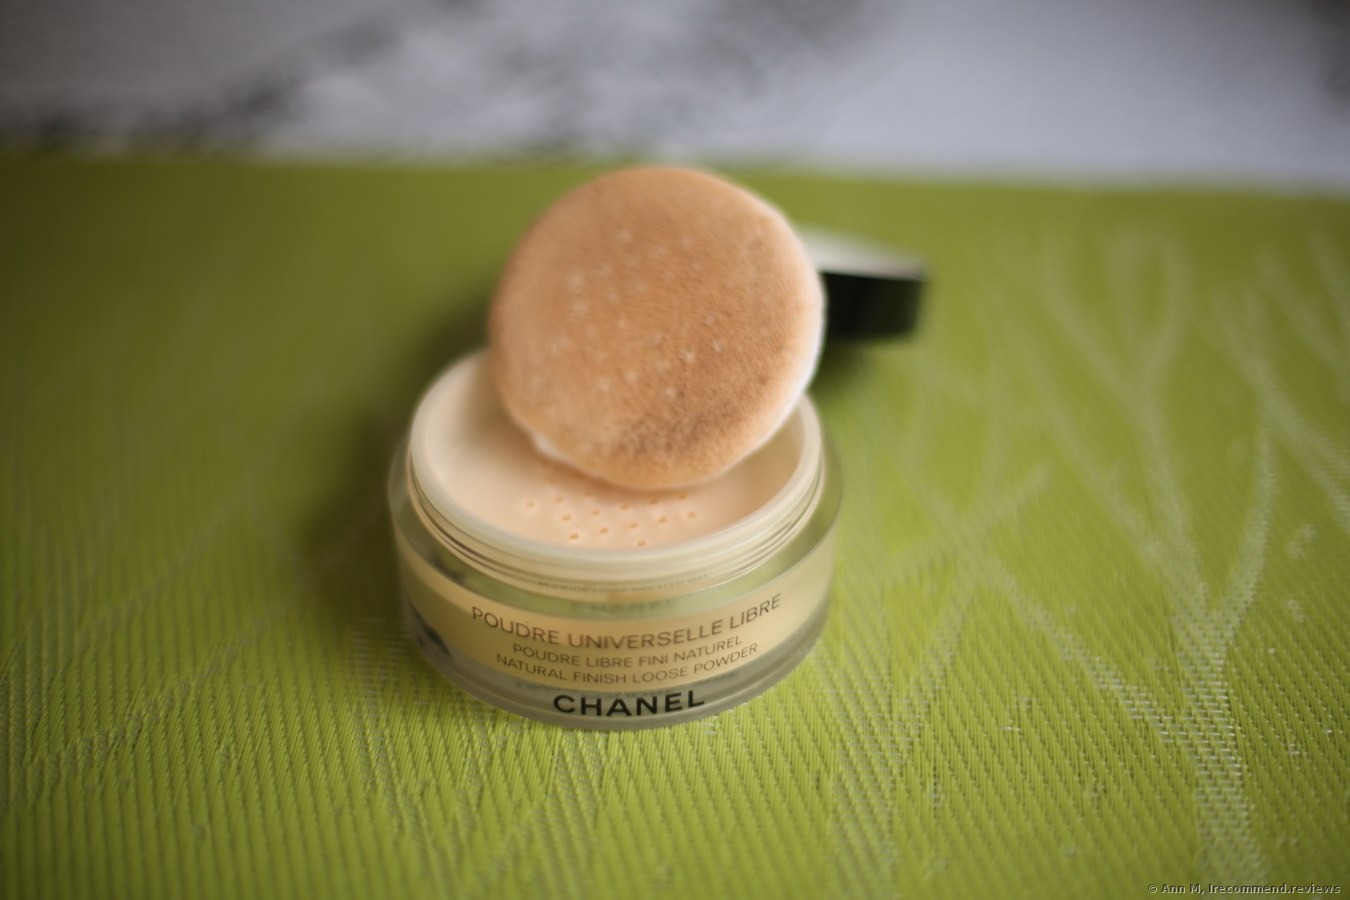 Buy Chanel Poudre Universelle Libre (30 g) from £40.38 (Today